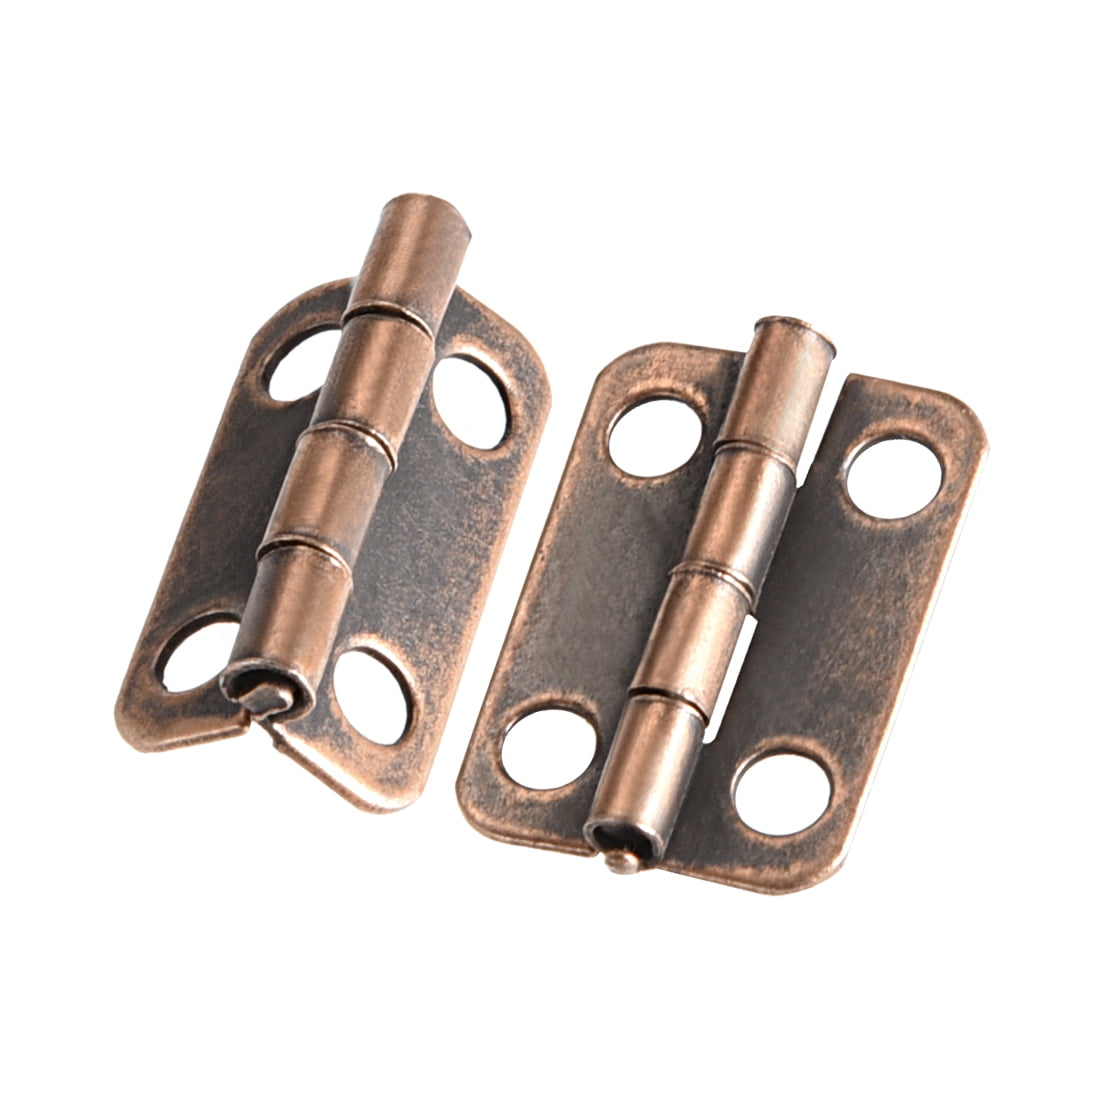 uxcell Jewelry Gift Box Case 28mm Length Vintage Style Hinges Bronze Tone 8PCS US-SA-AJD-219023